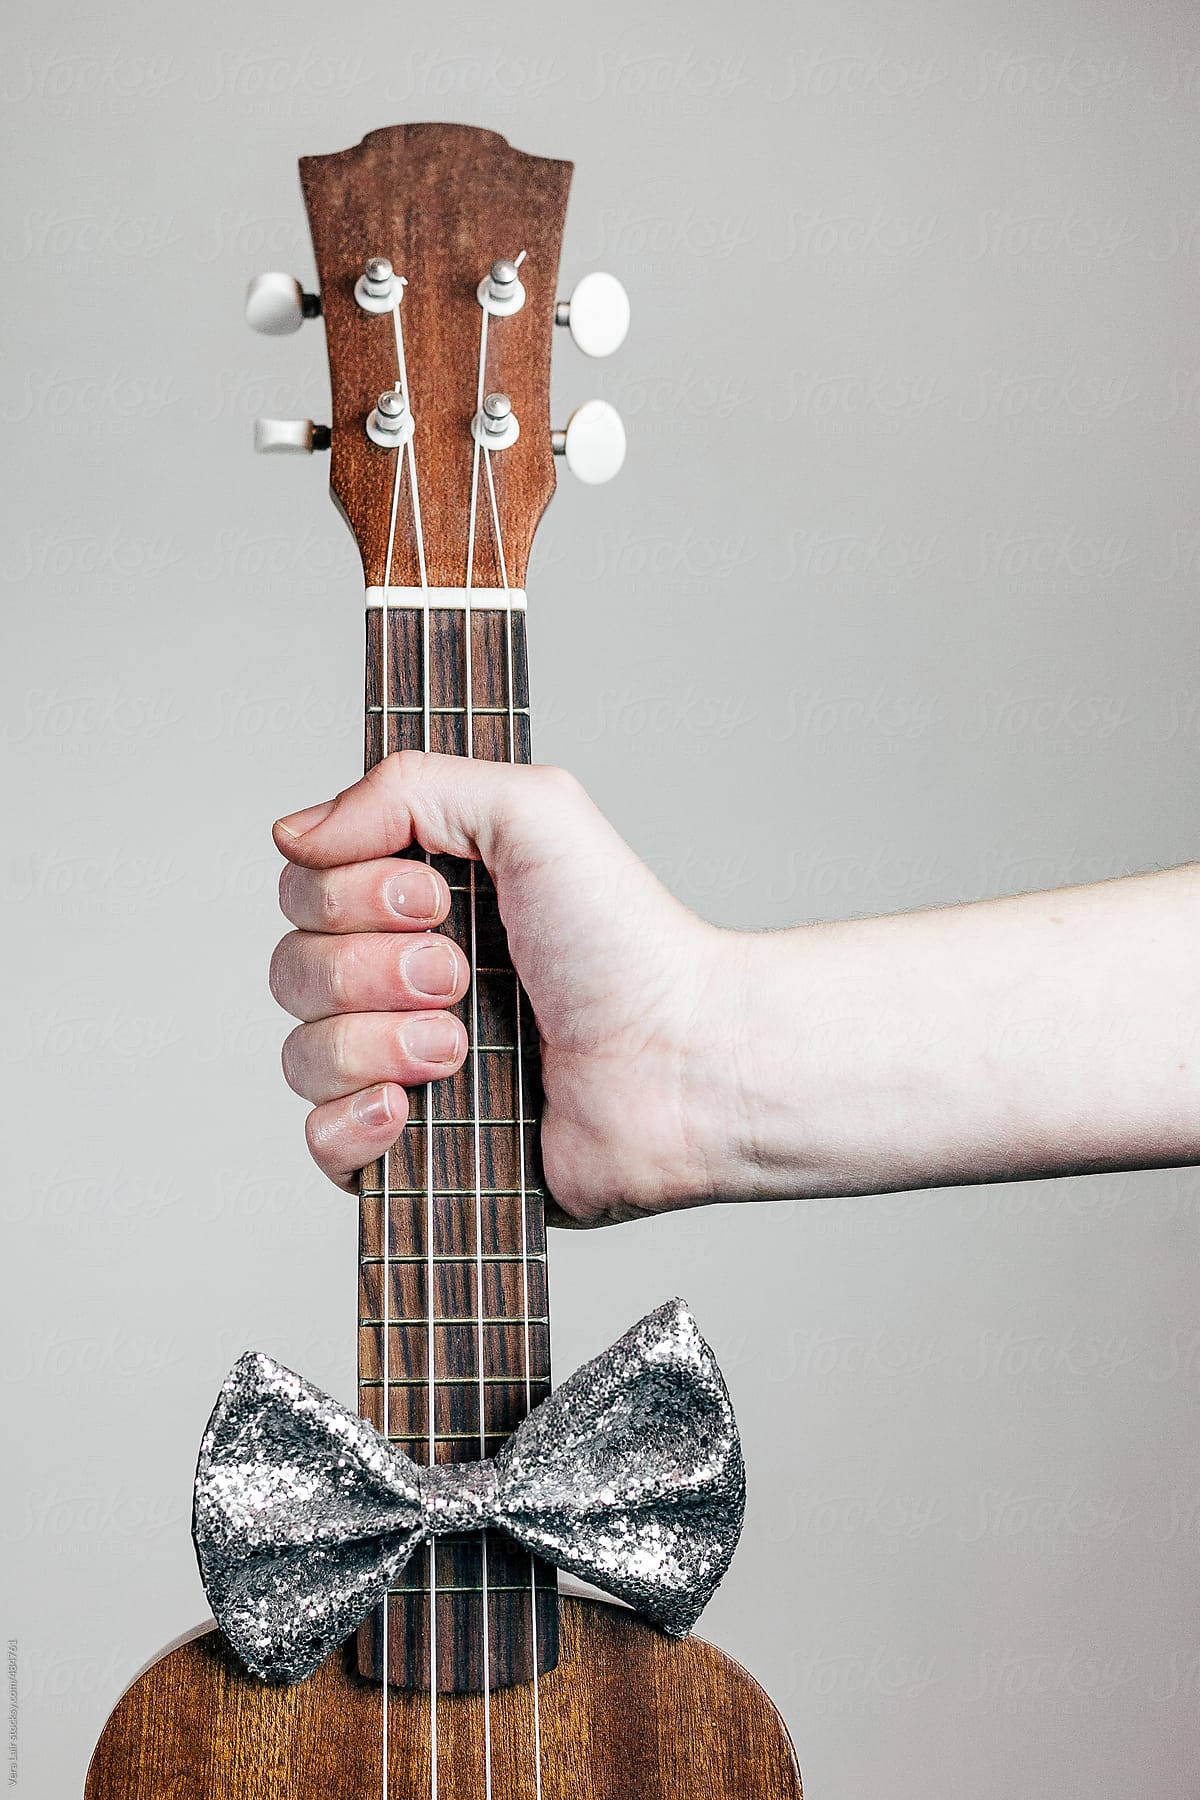 Hand holding a ukulele, with a bow tie